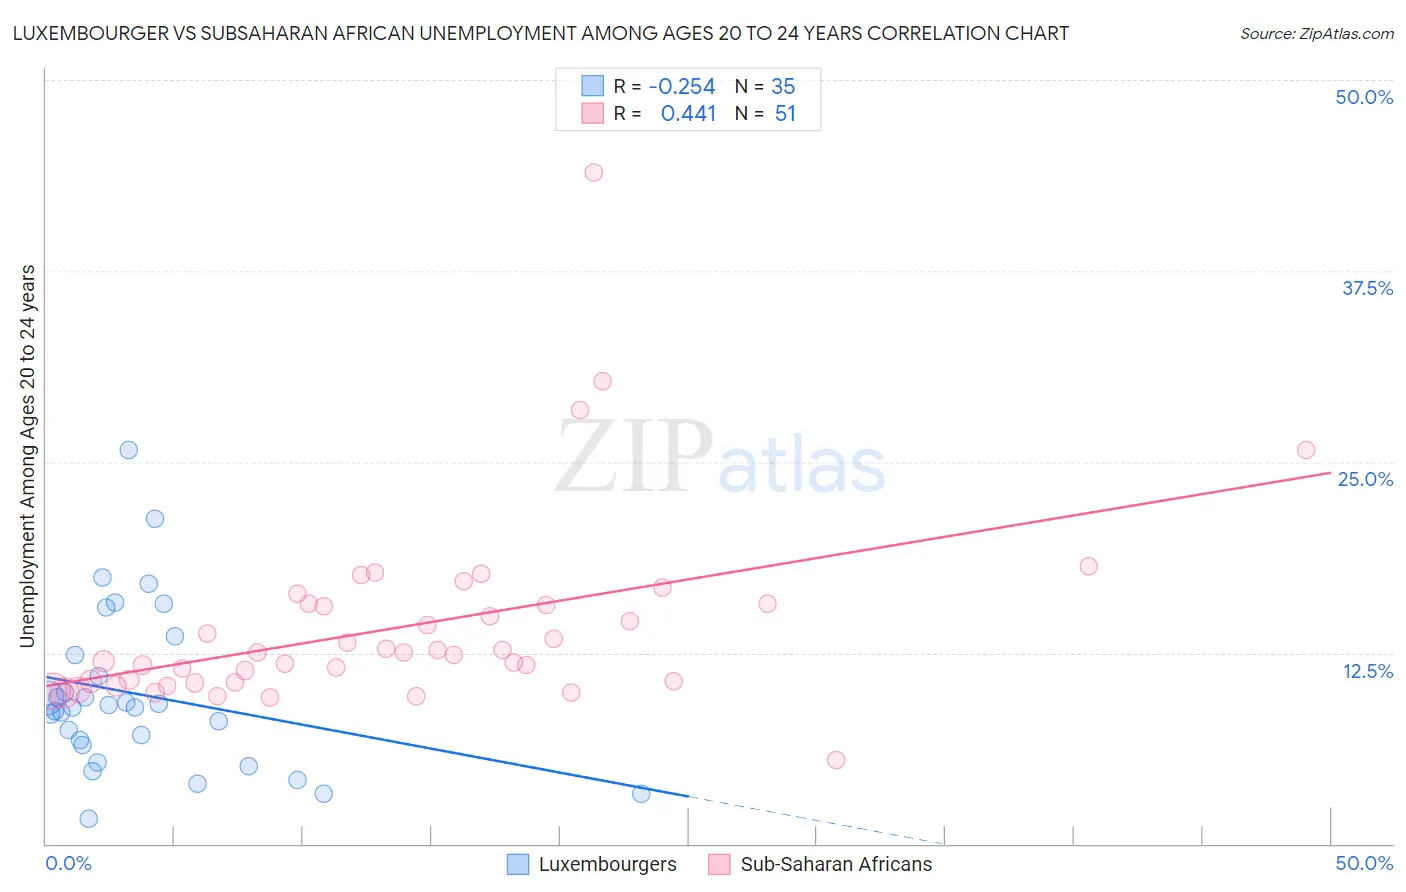 Luxembourger vs Subsaharan African Unemployment Among Ages 20 to 24 years